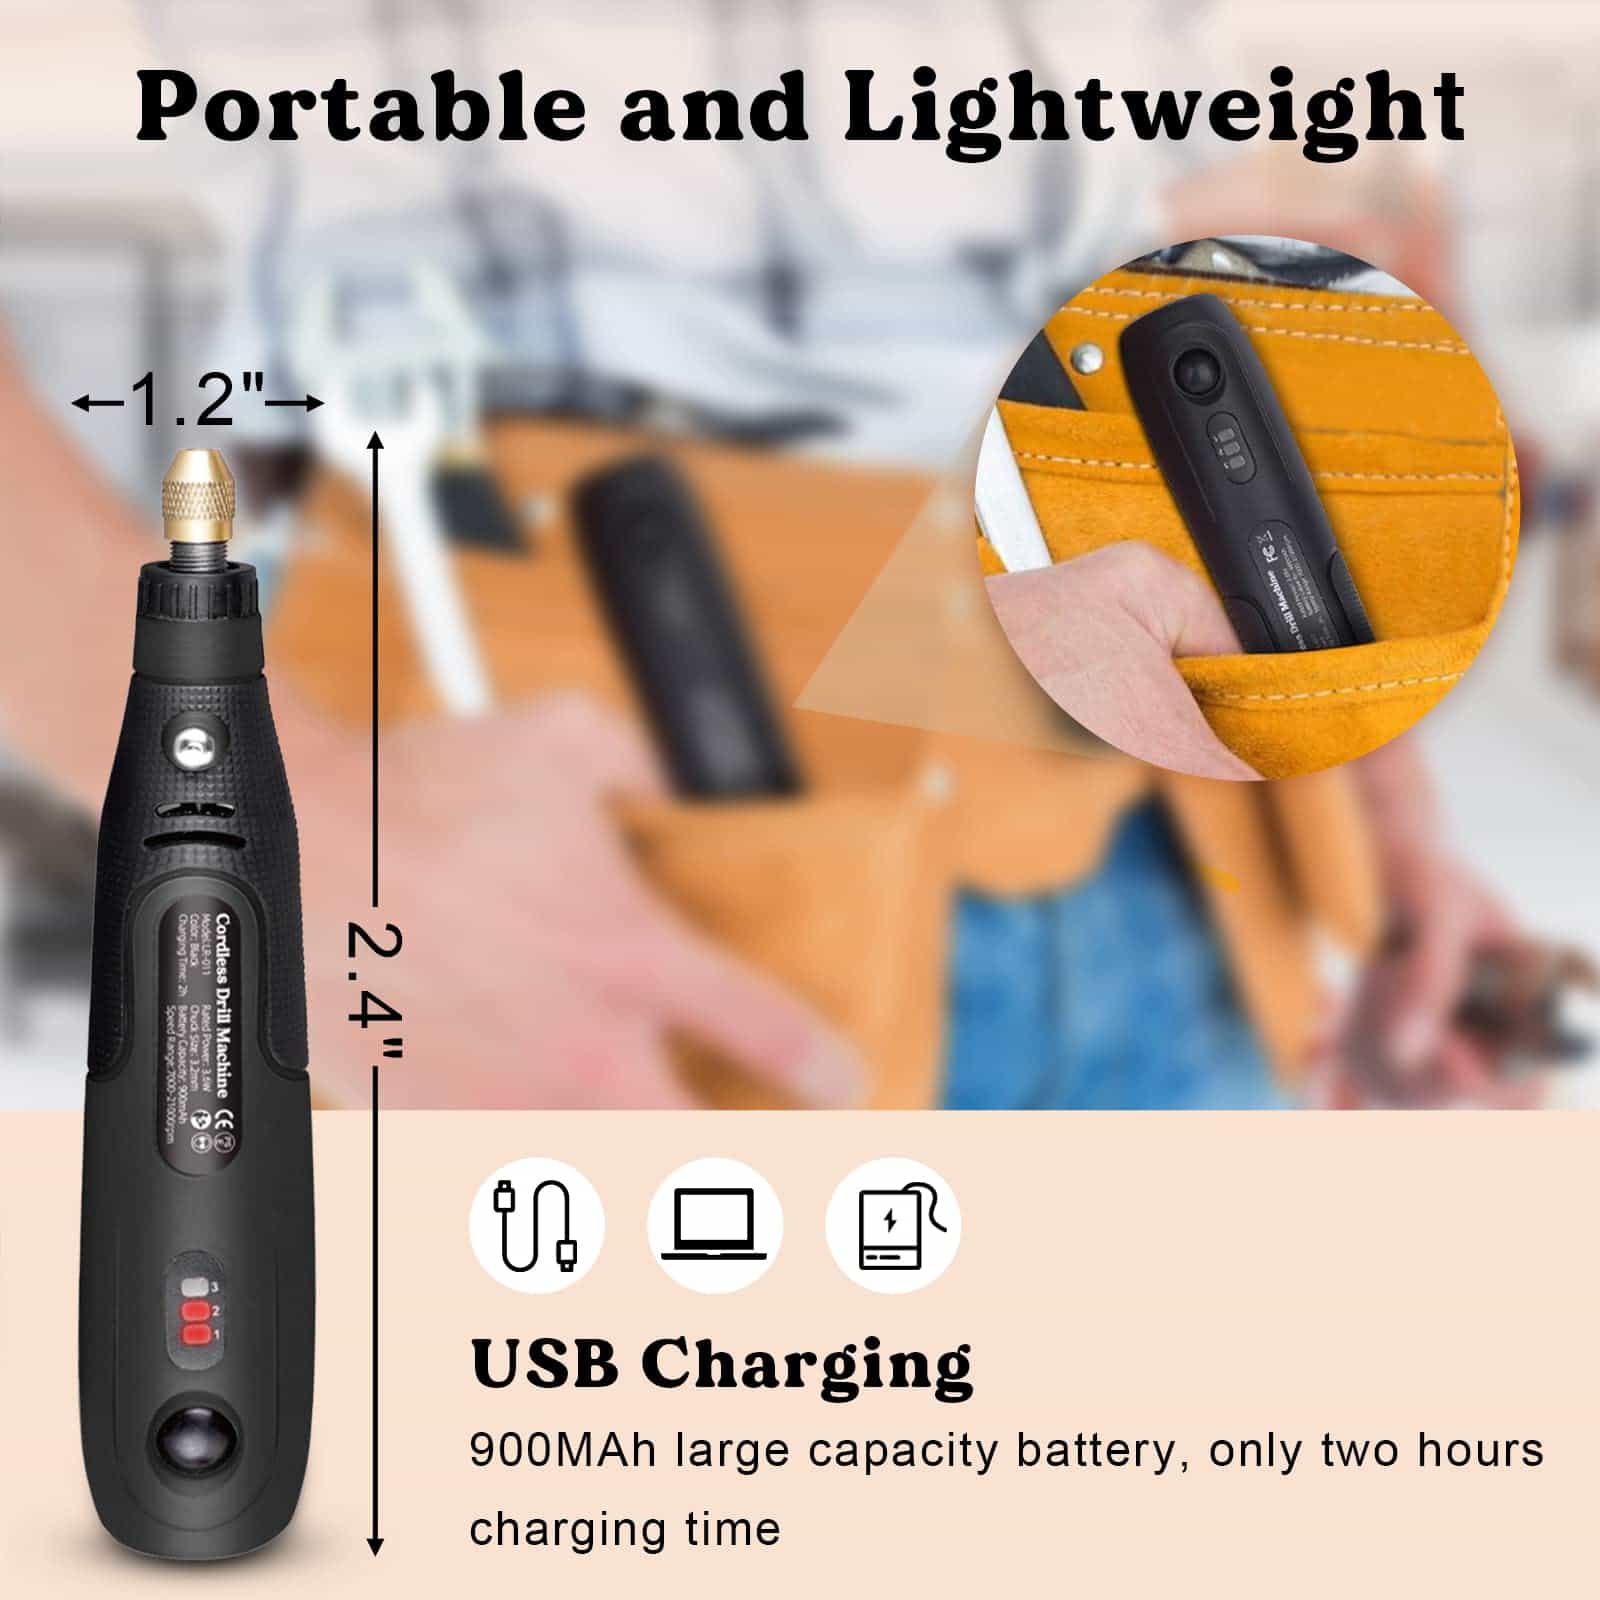 Mini Cordless Resin Drill with Deburring Tool – Let's Resin